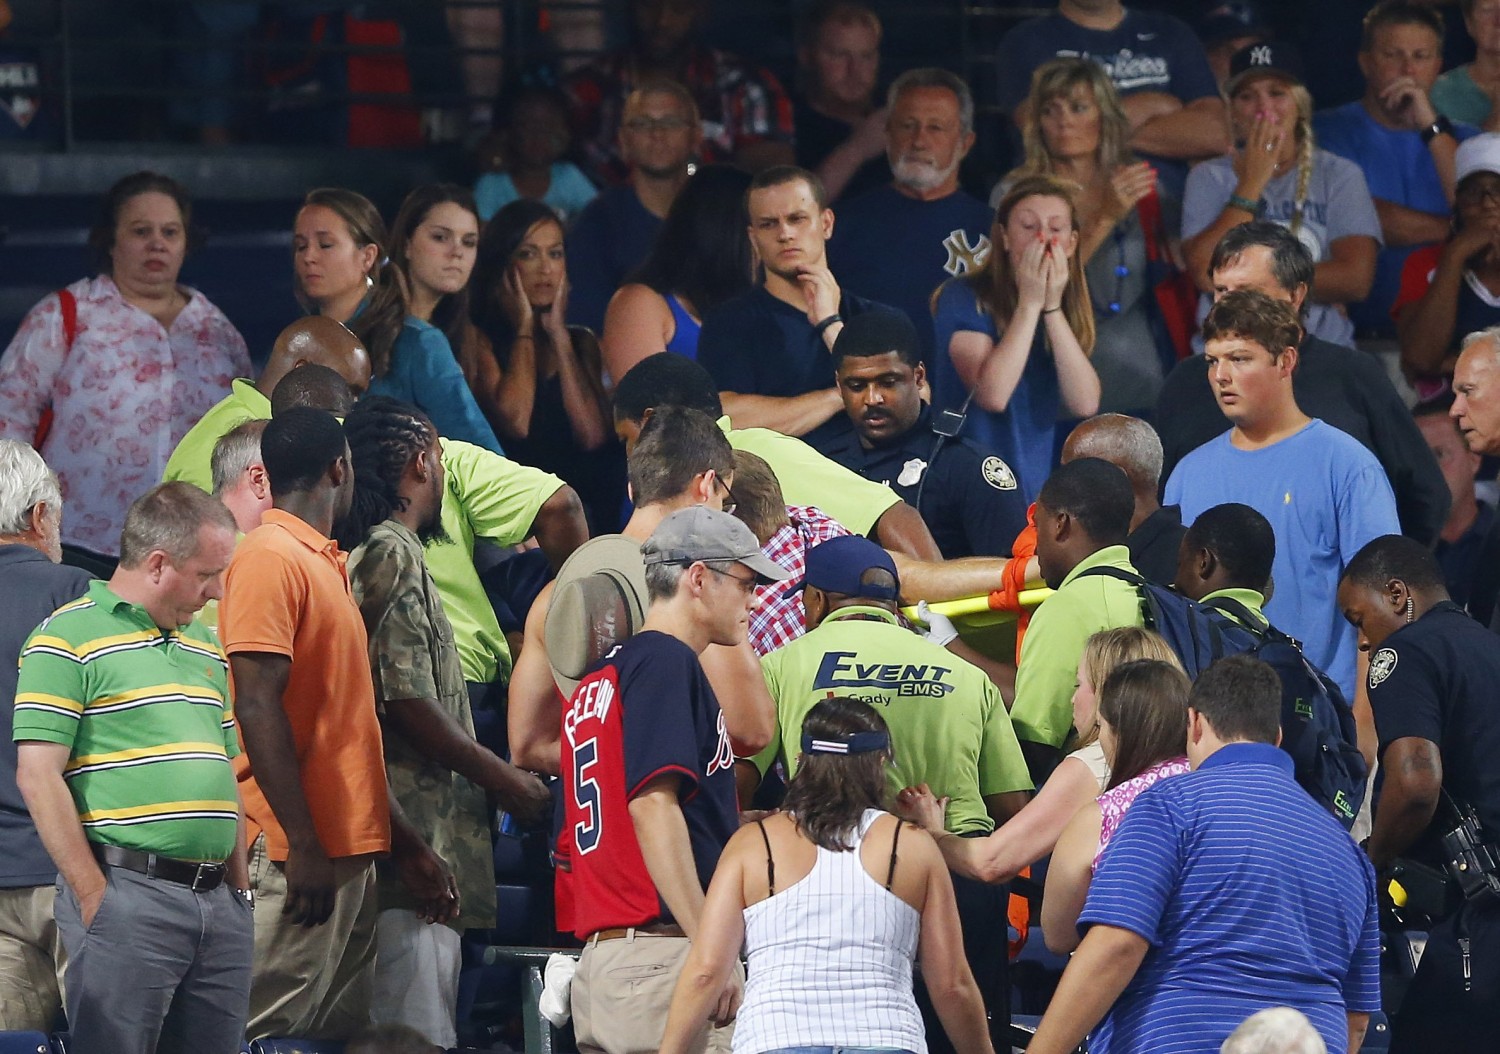 Fan Dies After Falling From Upper Deck at Atlanta Braves Game